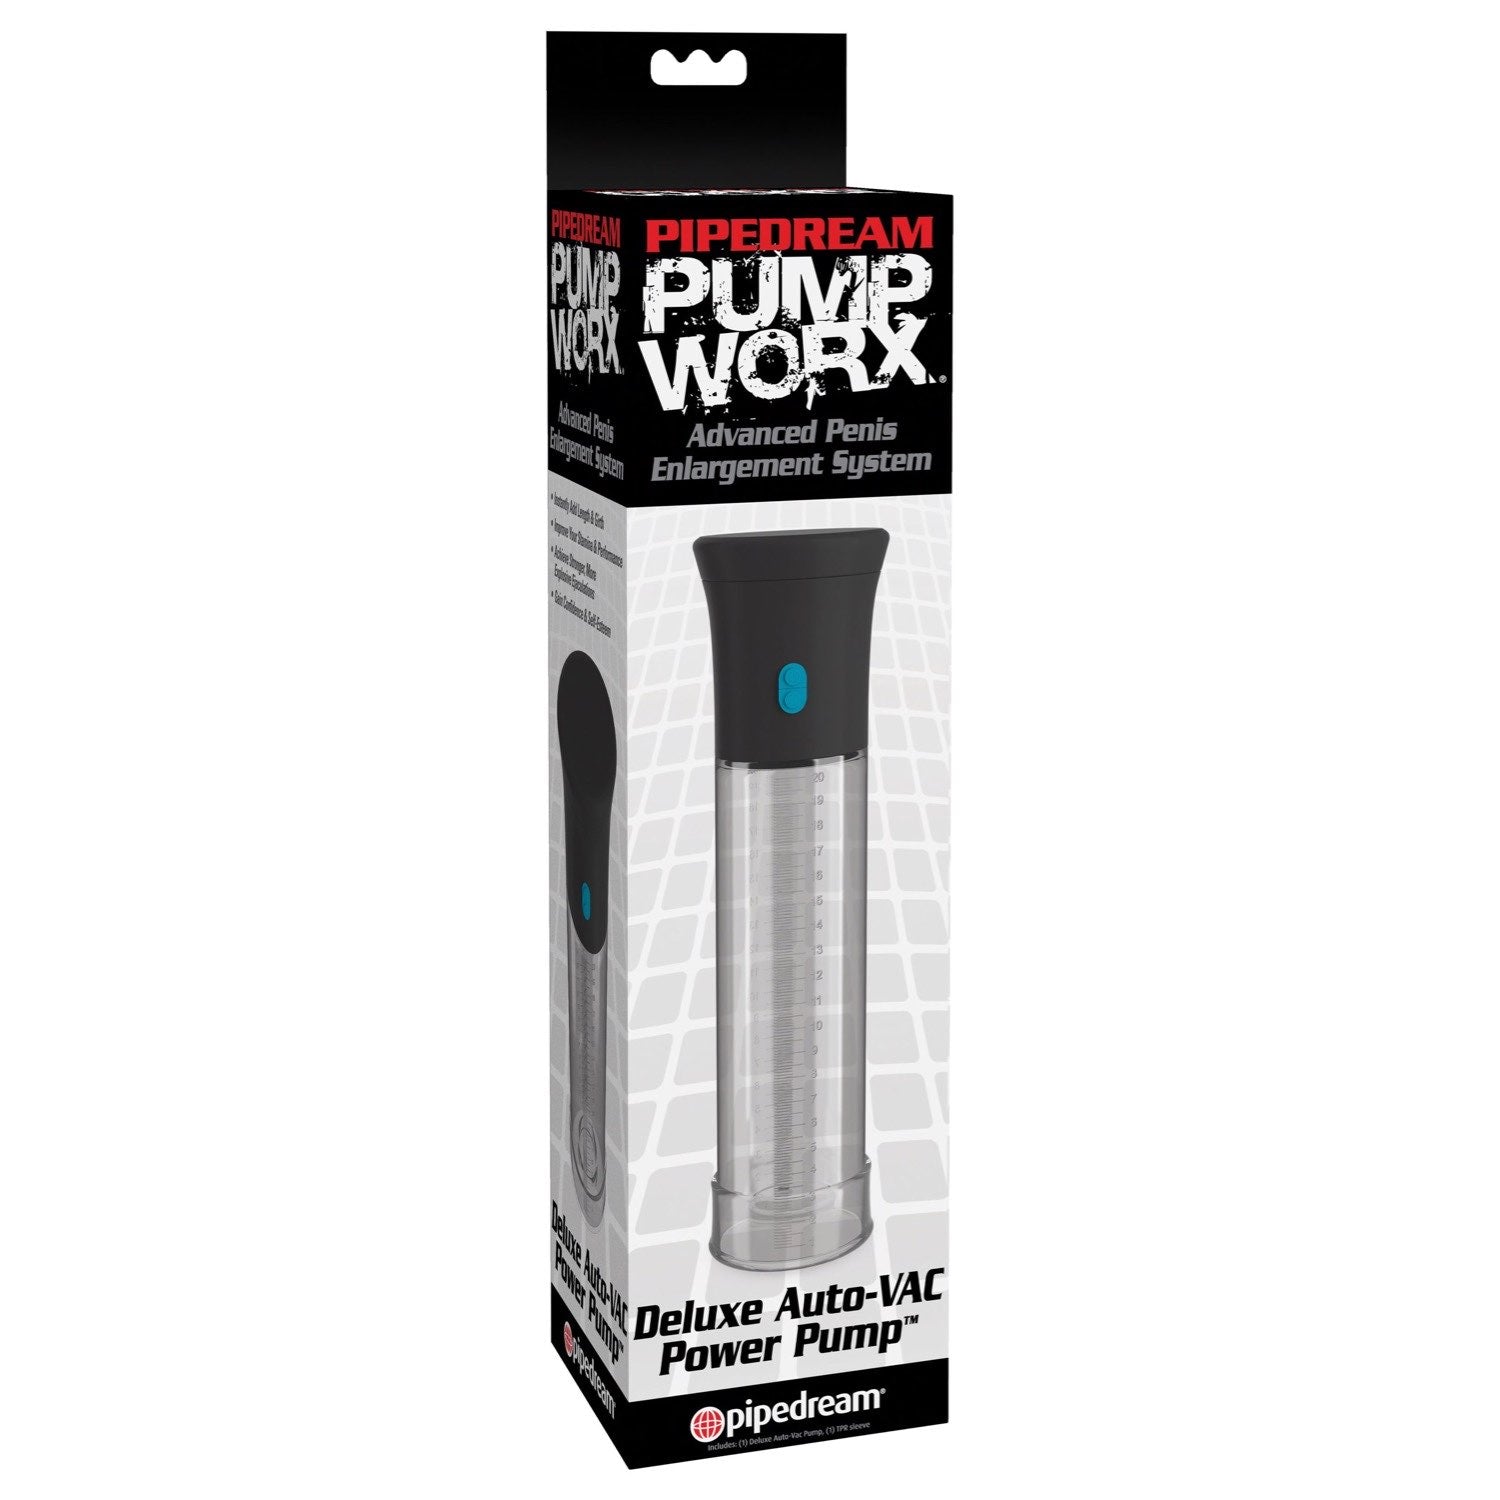 Pump Worx Deluxe Auto-vac Power Pump - Powered Penis Pump by Pipedream